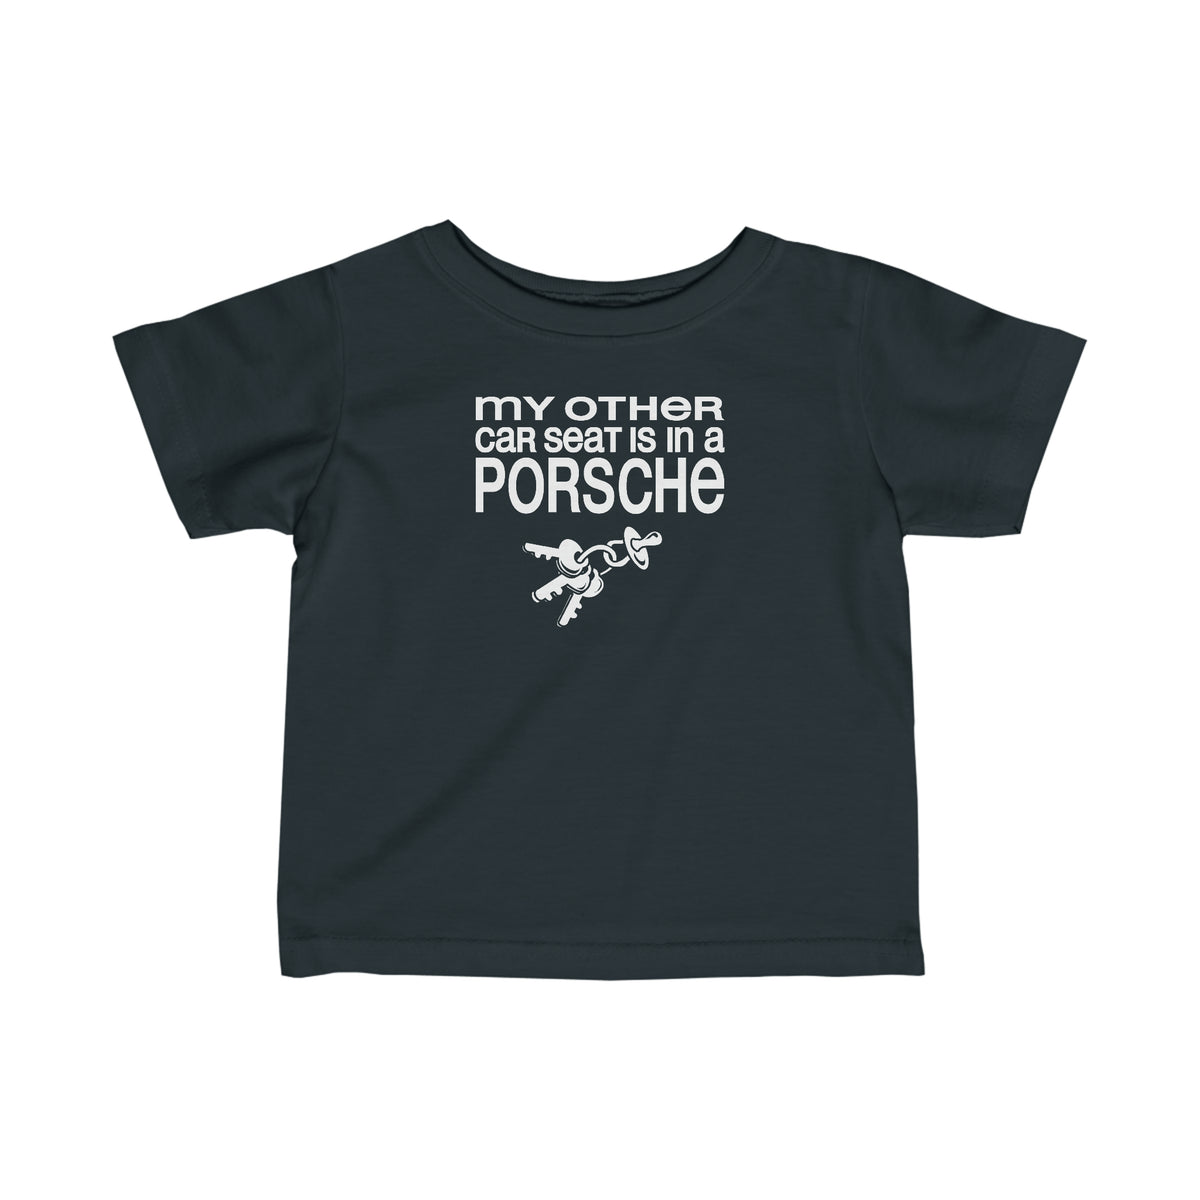 My Other Car Seat Is In A Porsche - Baby T-Shirt